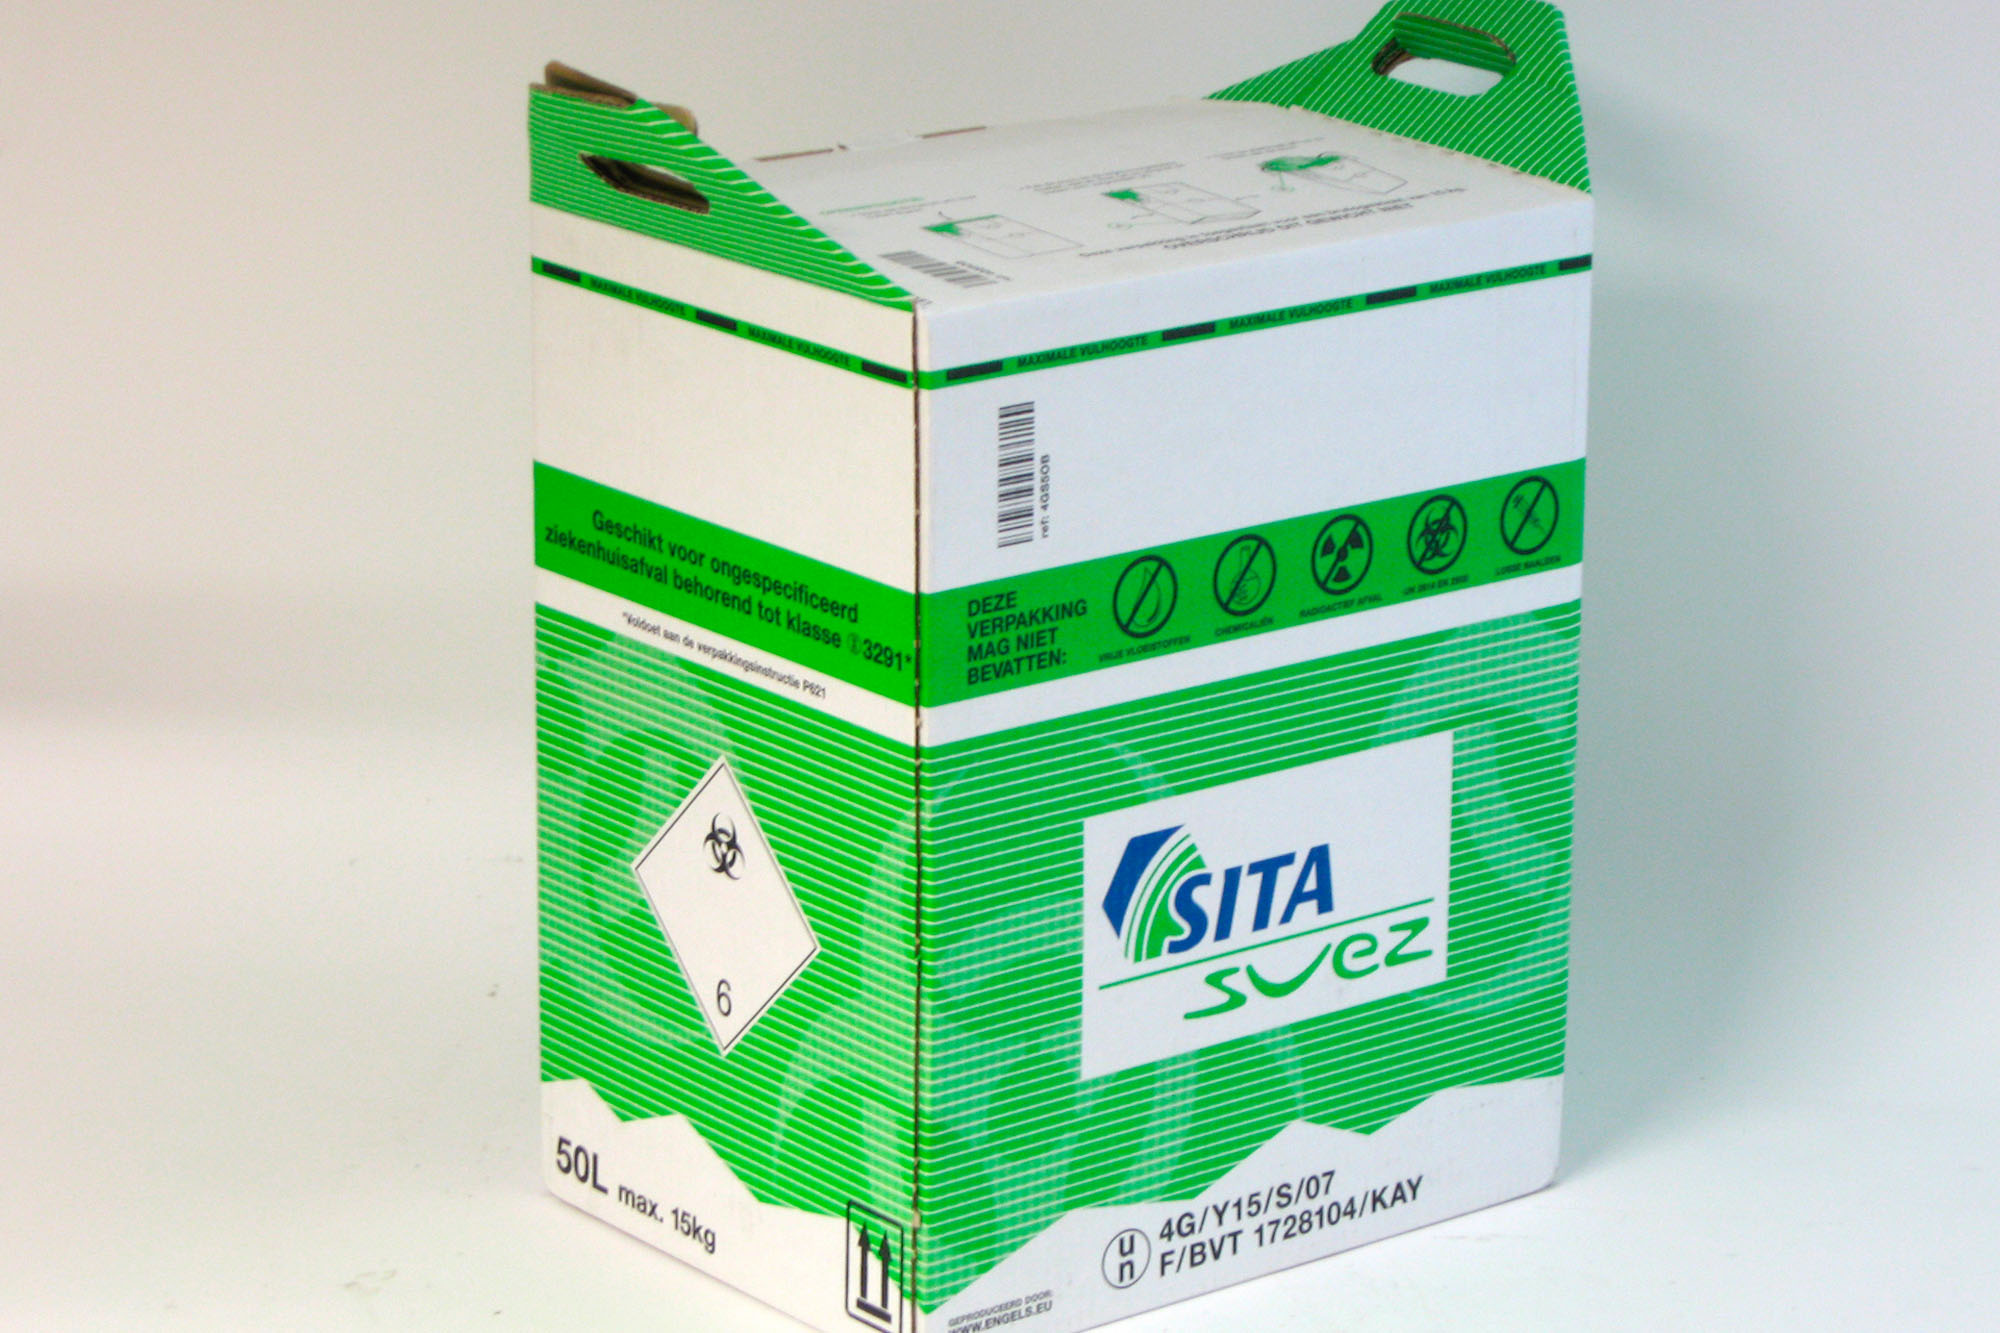 Containers for specific hospital waste (SZA)